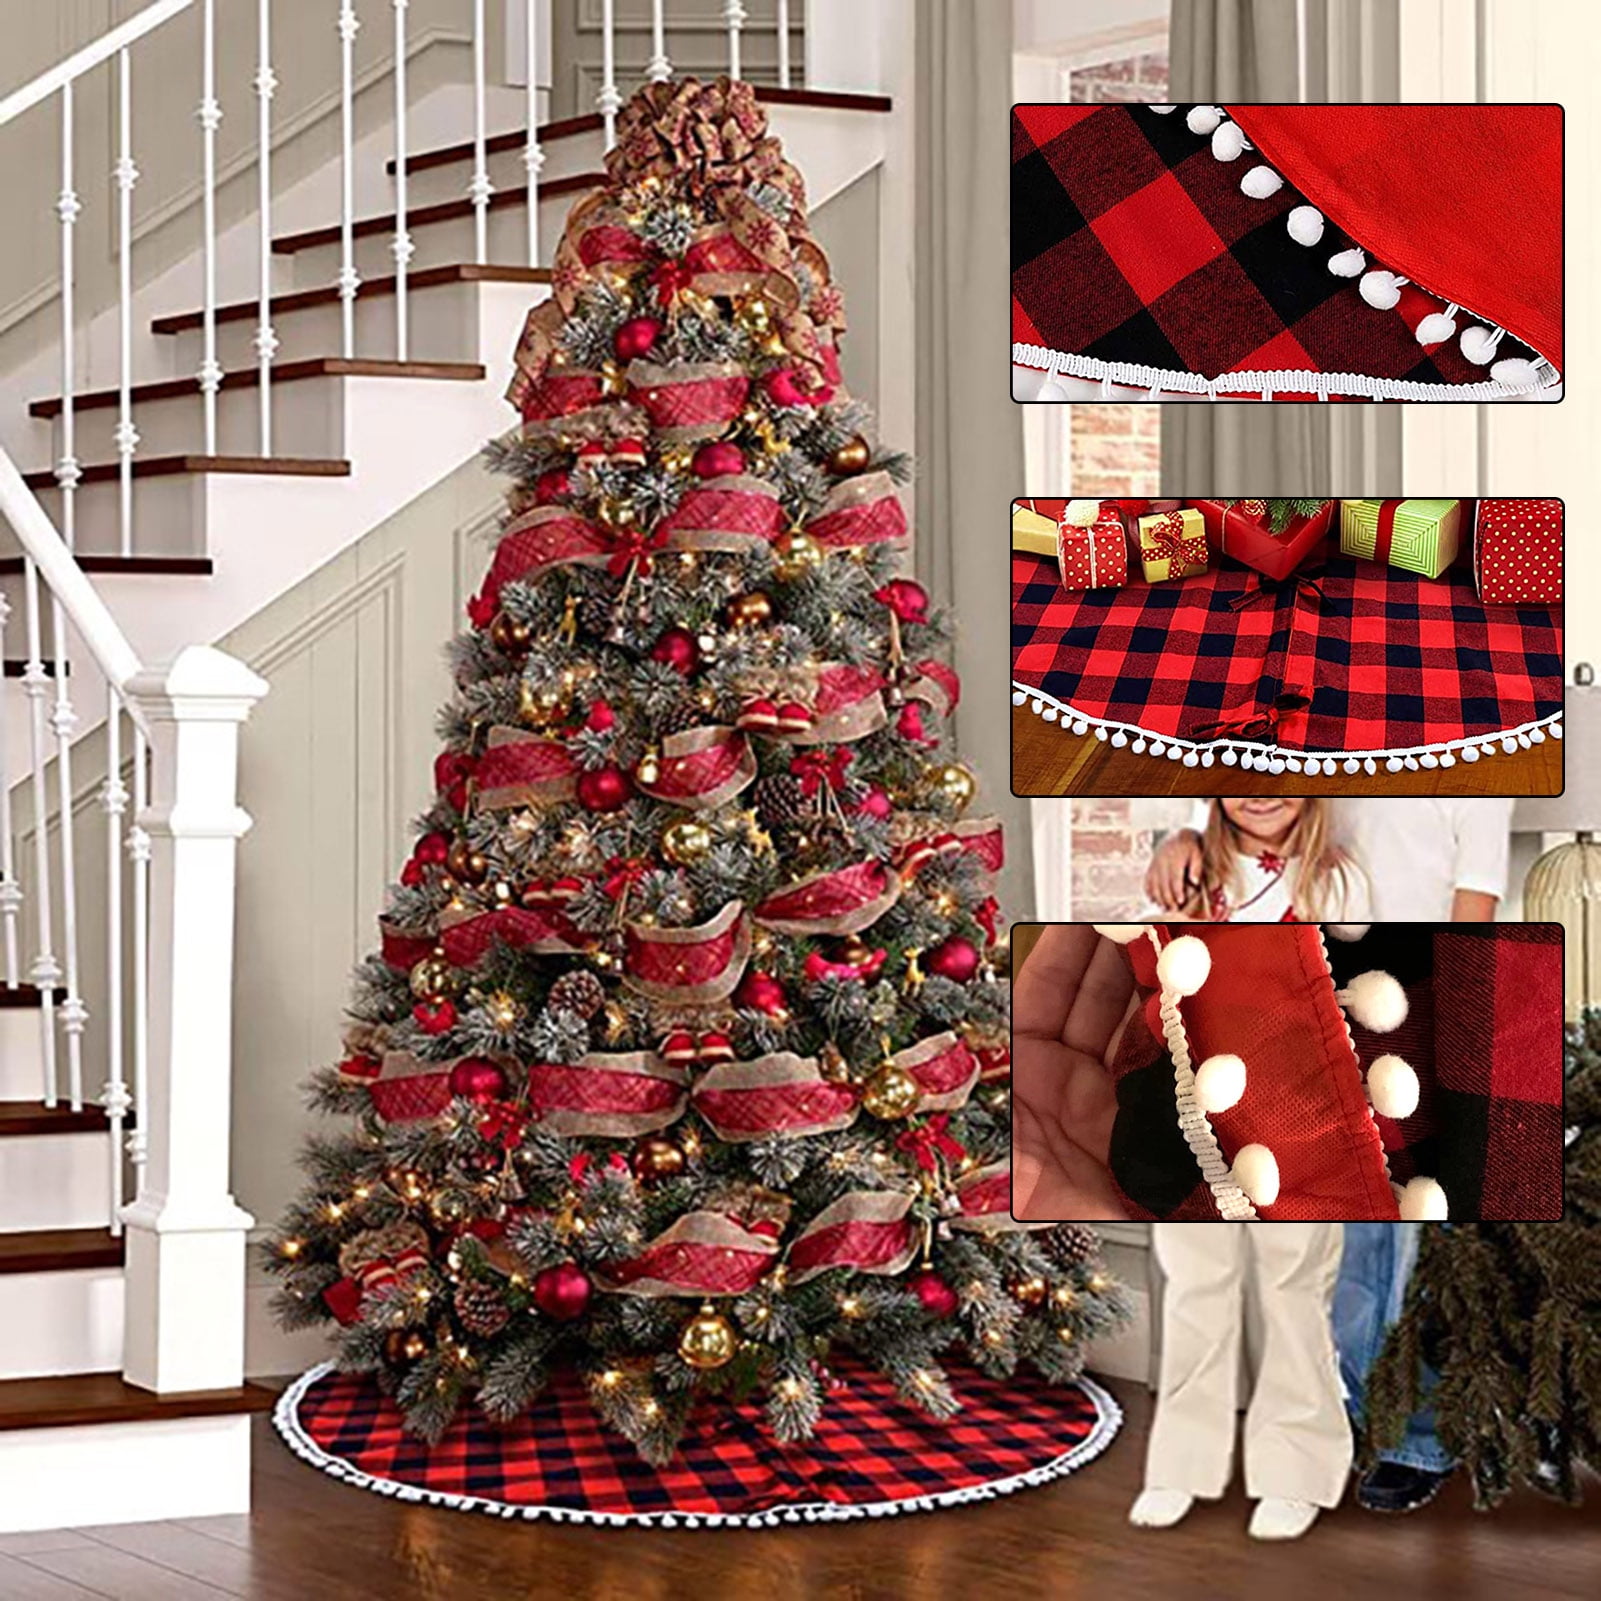 for Xmas New Year Holiday Home Ornaments 无 48 Inches Christmas Tree Skirt Christmas Deocration Red Black Plaid Buffalo Double Tree Skirt Cotton Tree Skirt